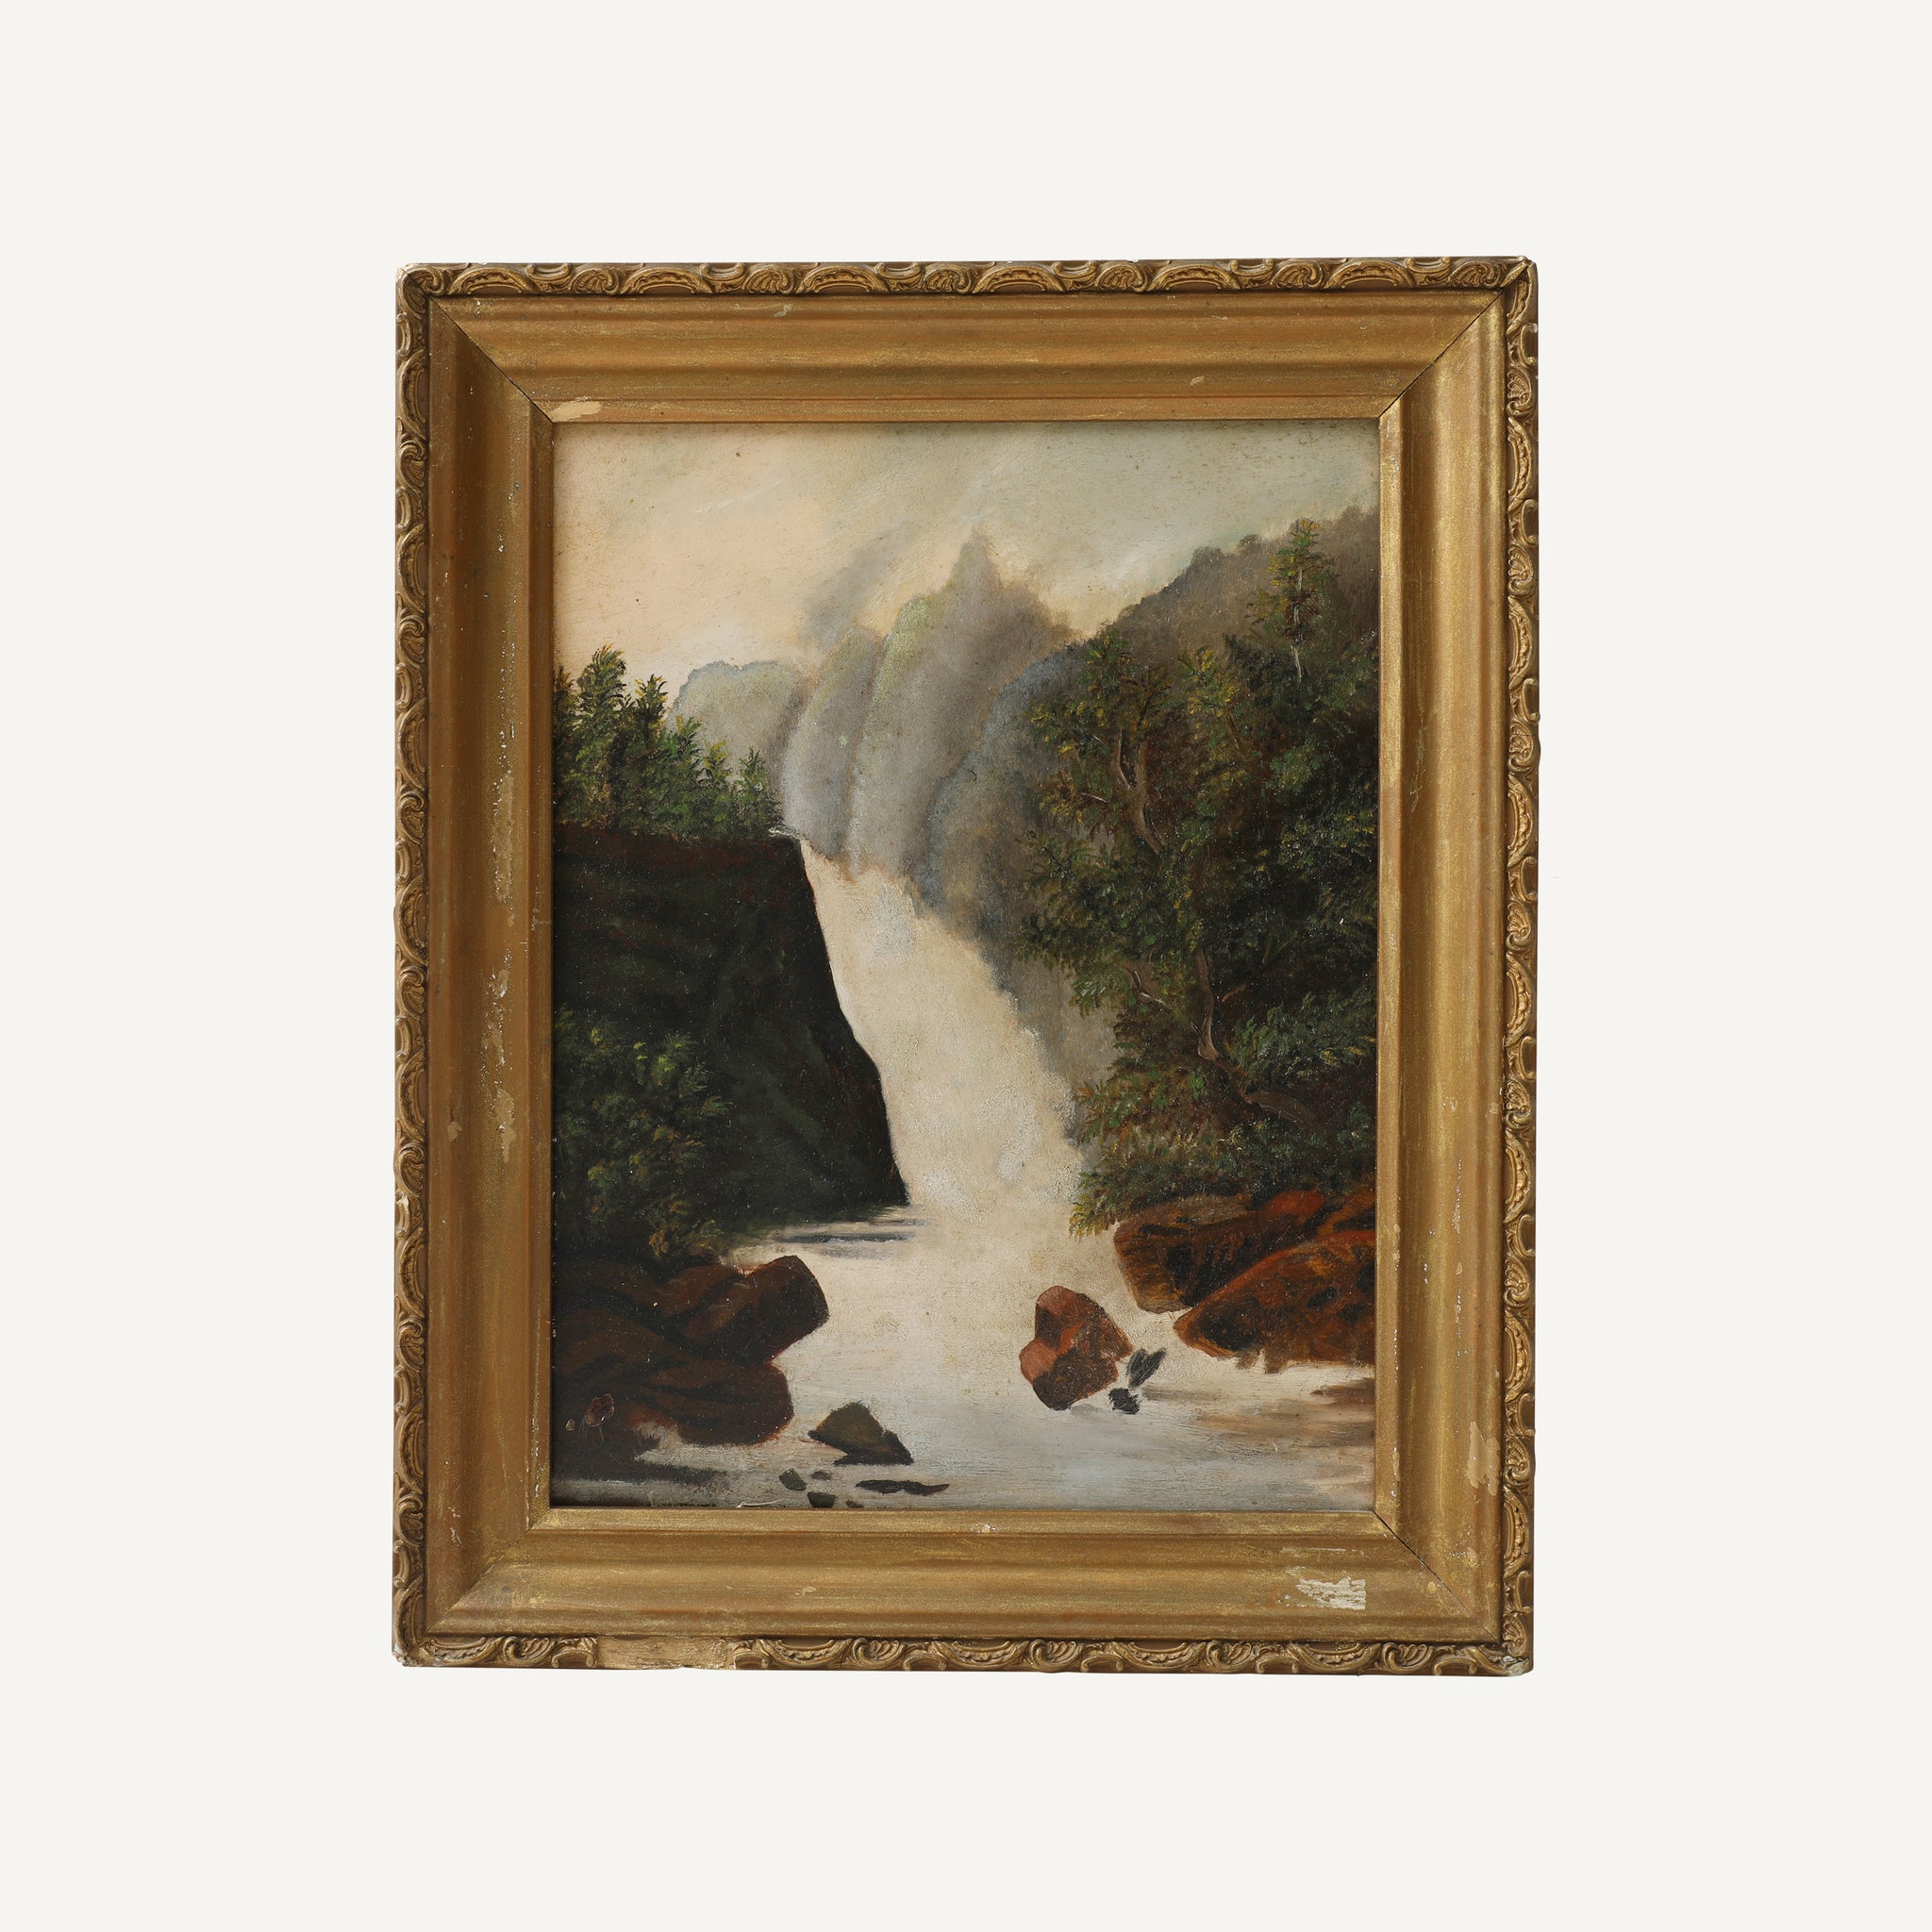 ANTIQUE WATERFALL LANDSCAPE PAINTING